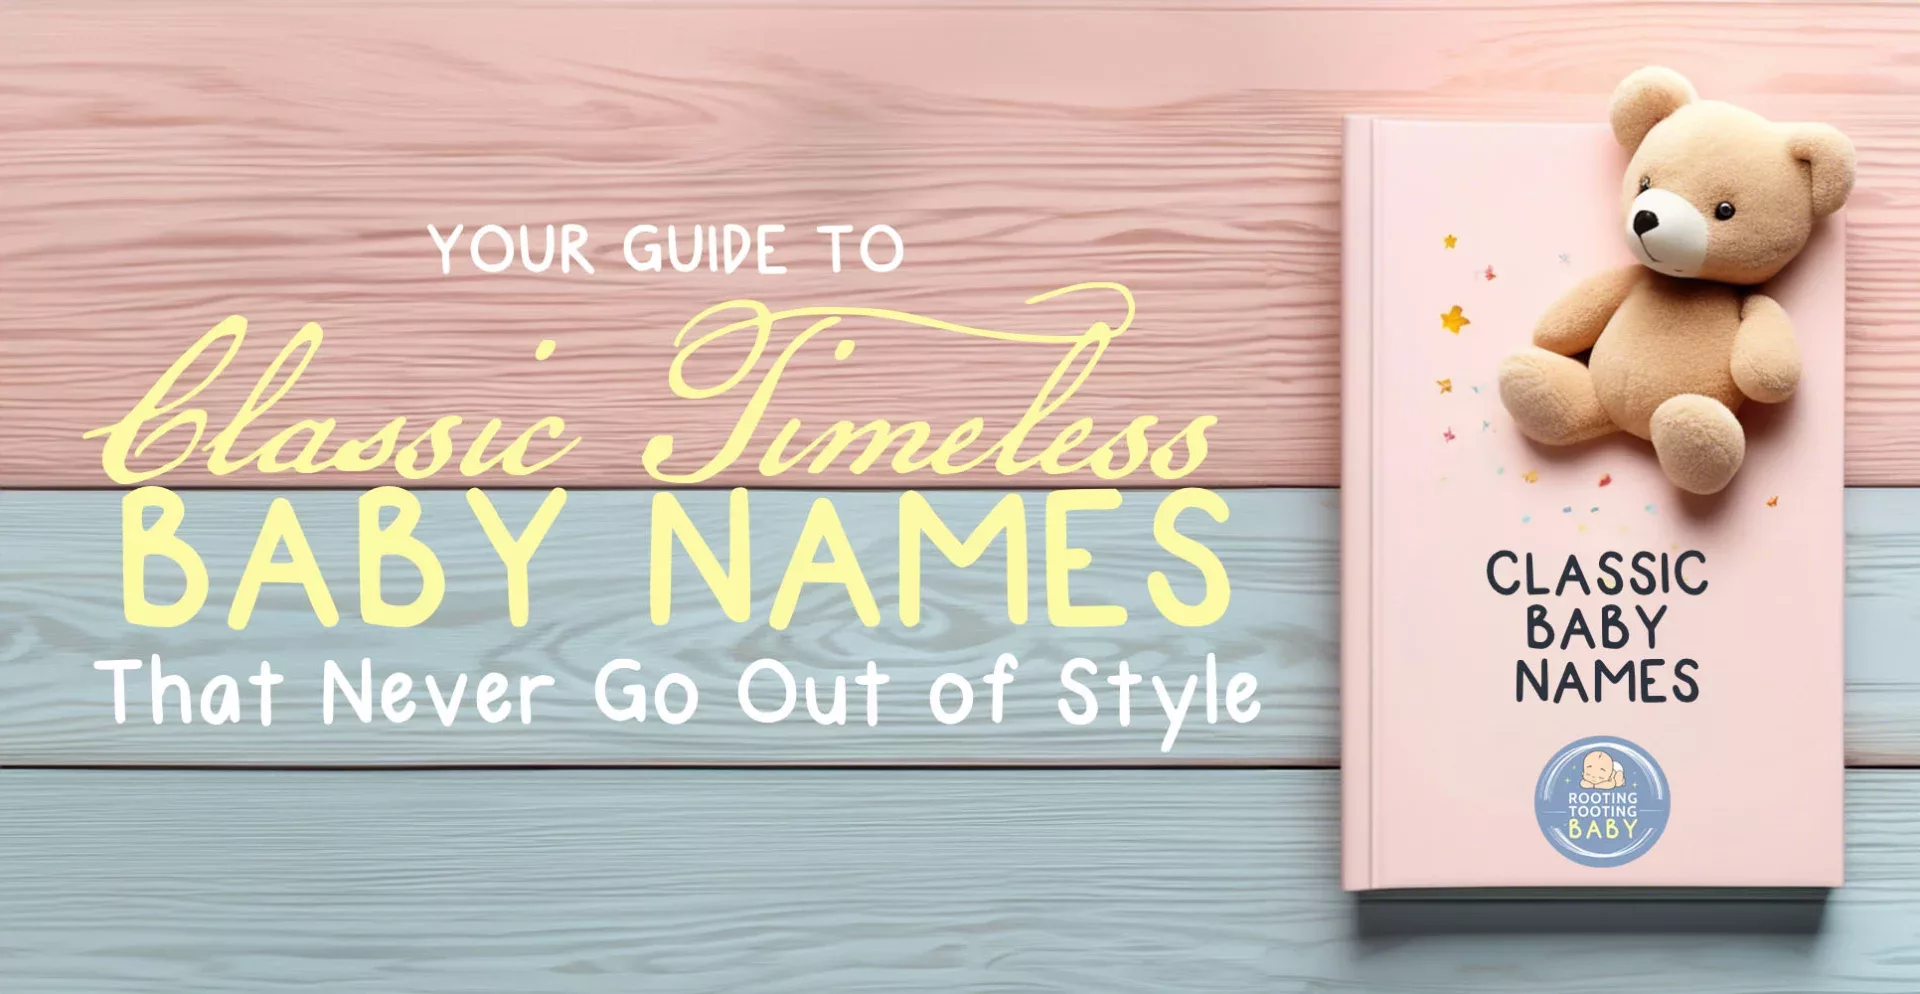 Your Guide to Classic Timeless Baby Names That Never Go Out of Style